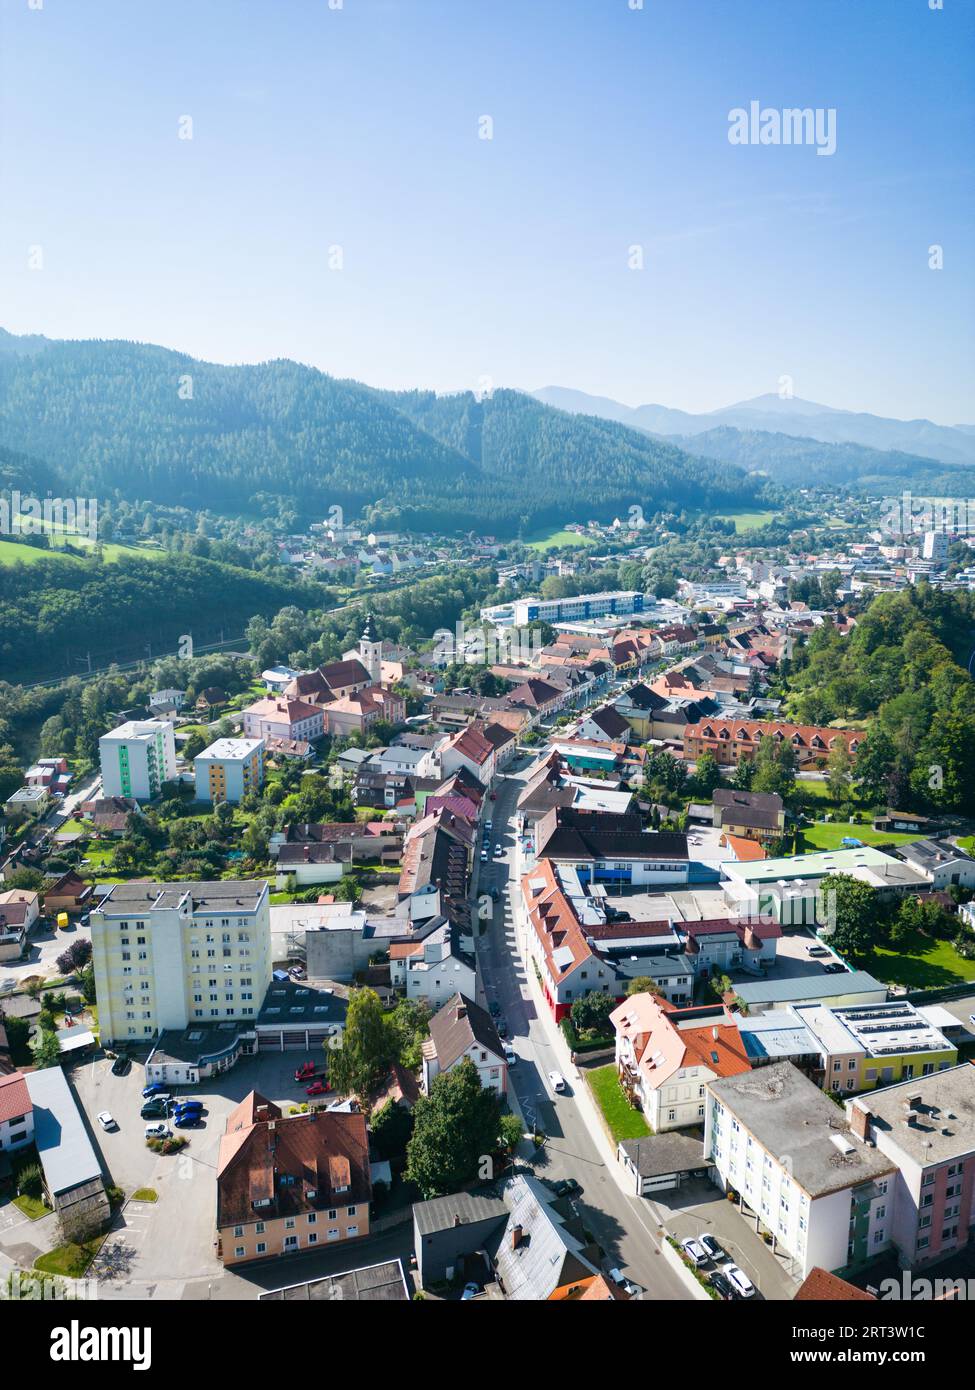 Aerial view of the town of Kindberg iin Styria, Austria during summer Stock Photo